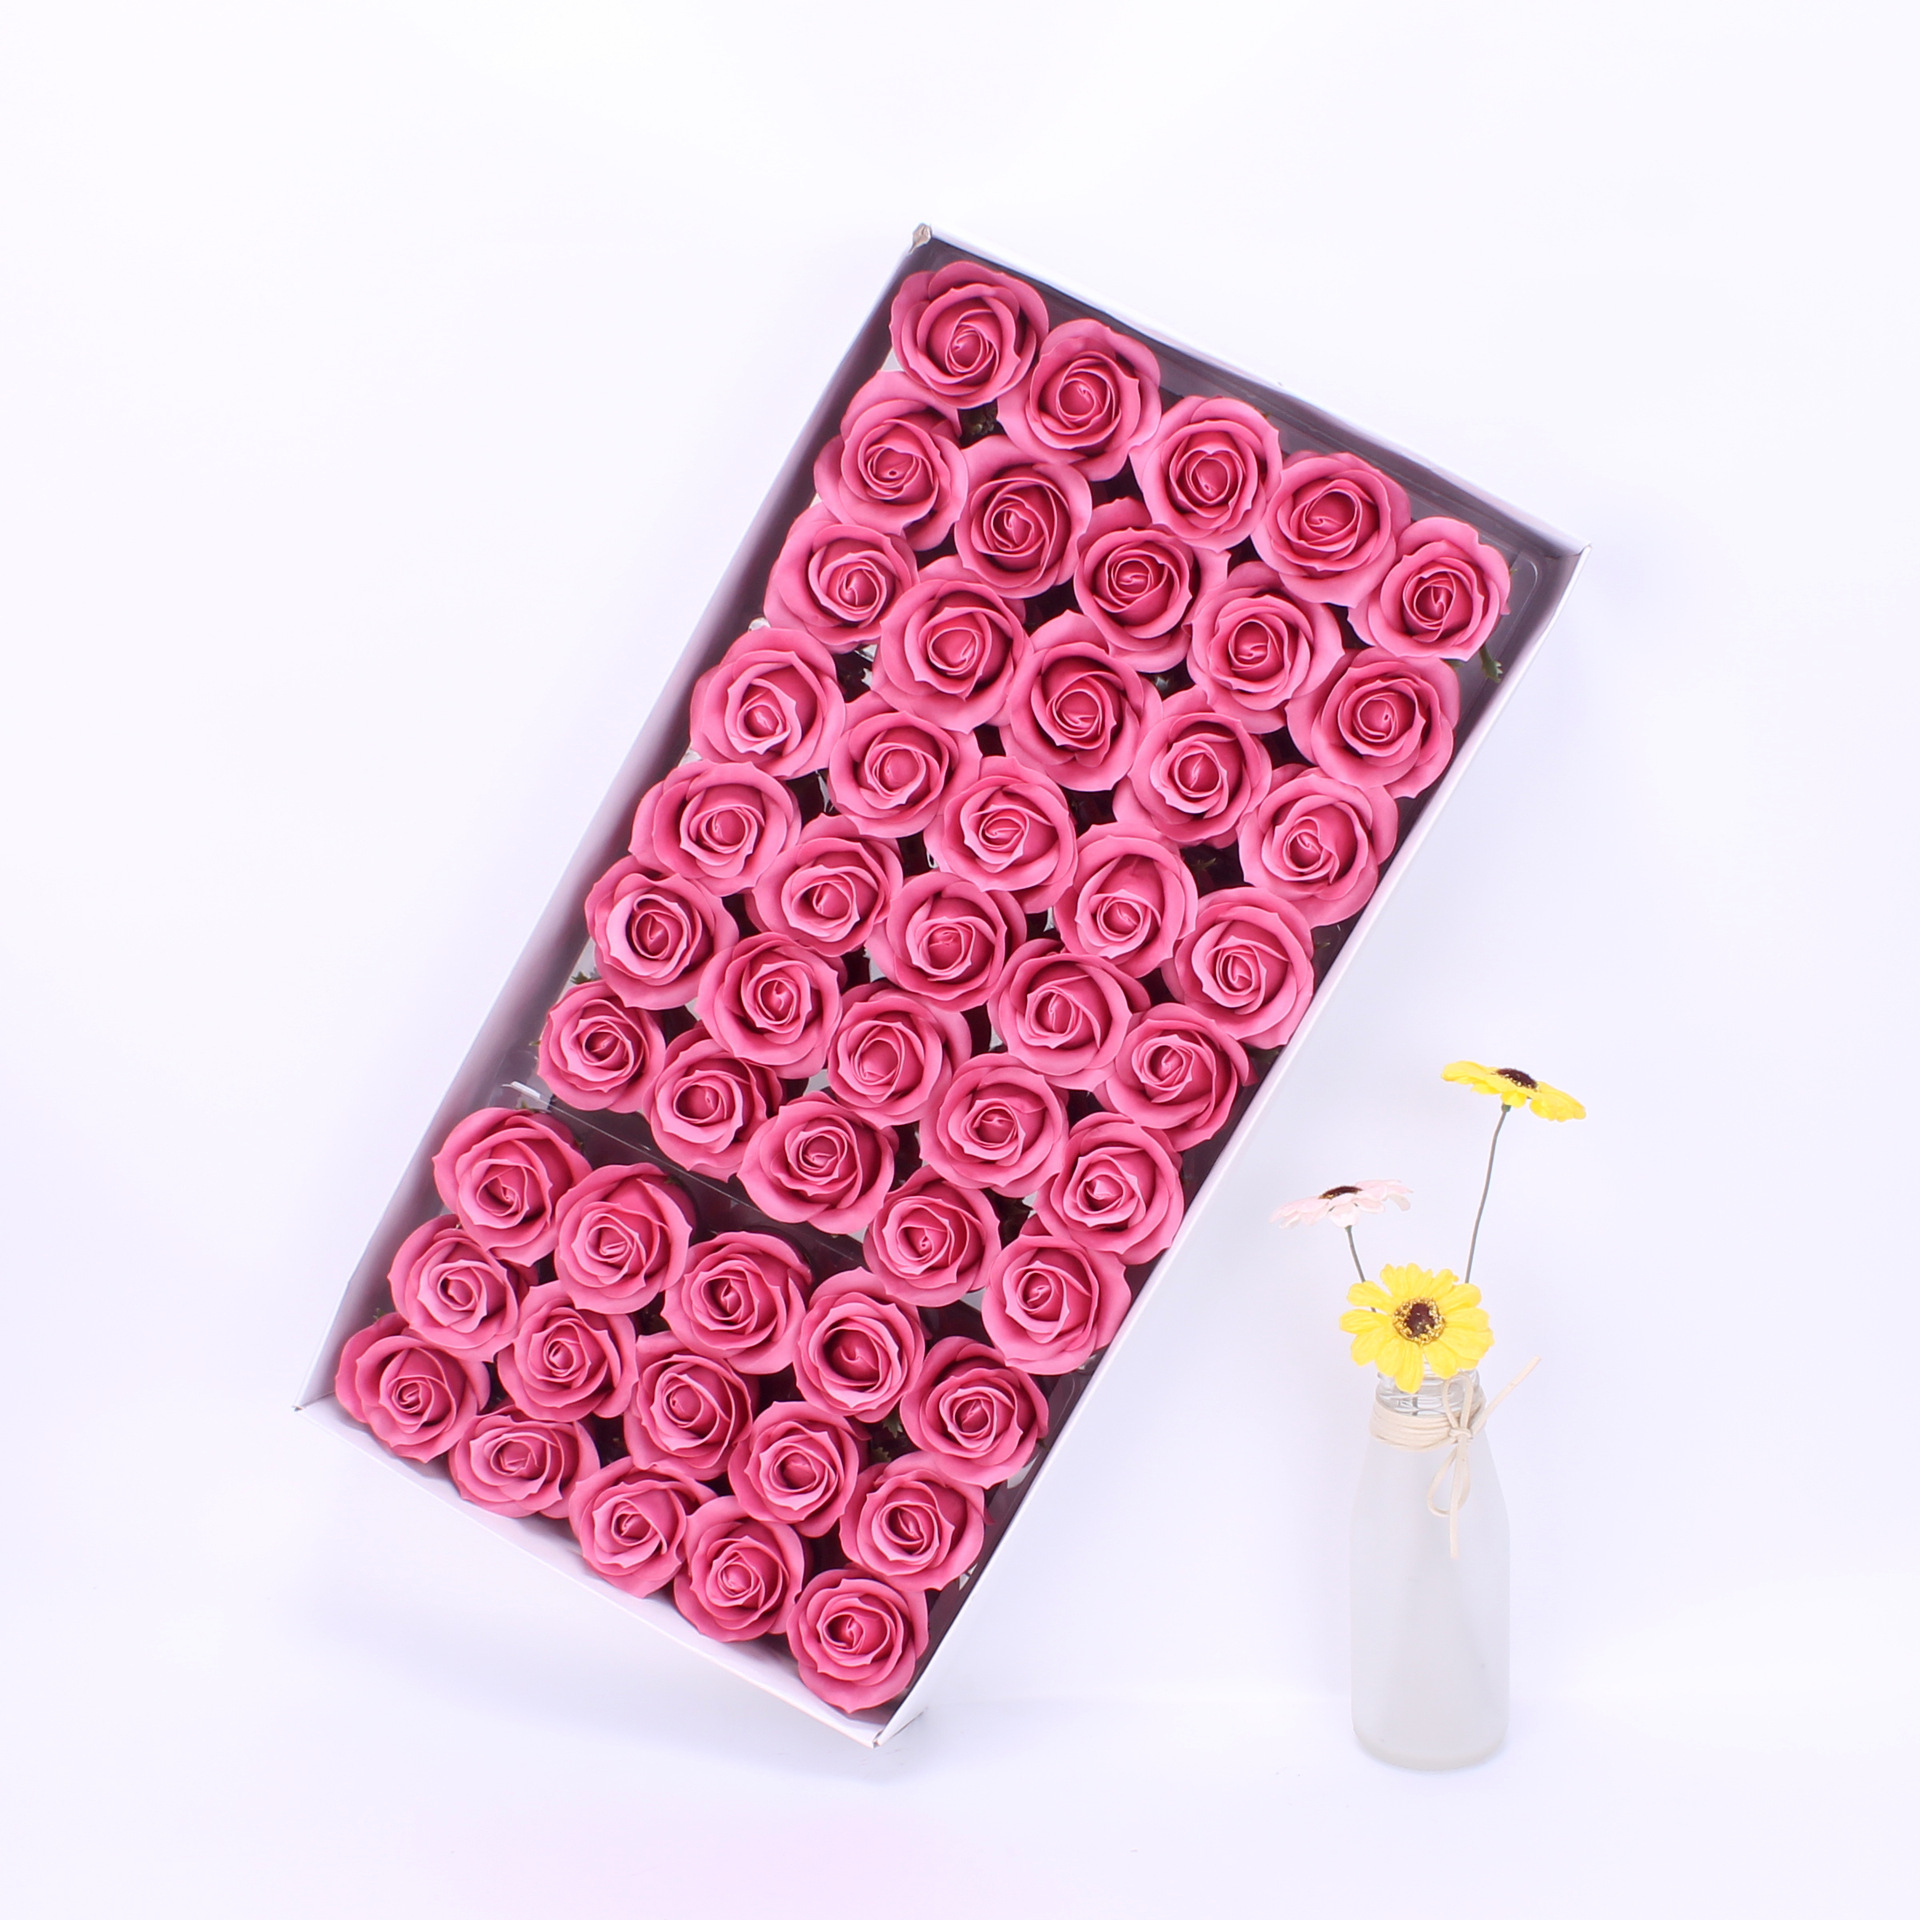 Rose Creative Gift Cold Beauty Four-Layer Soap Flower Head Wholesale Valentine's Day Gift Soap Flower Head Gift Box